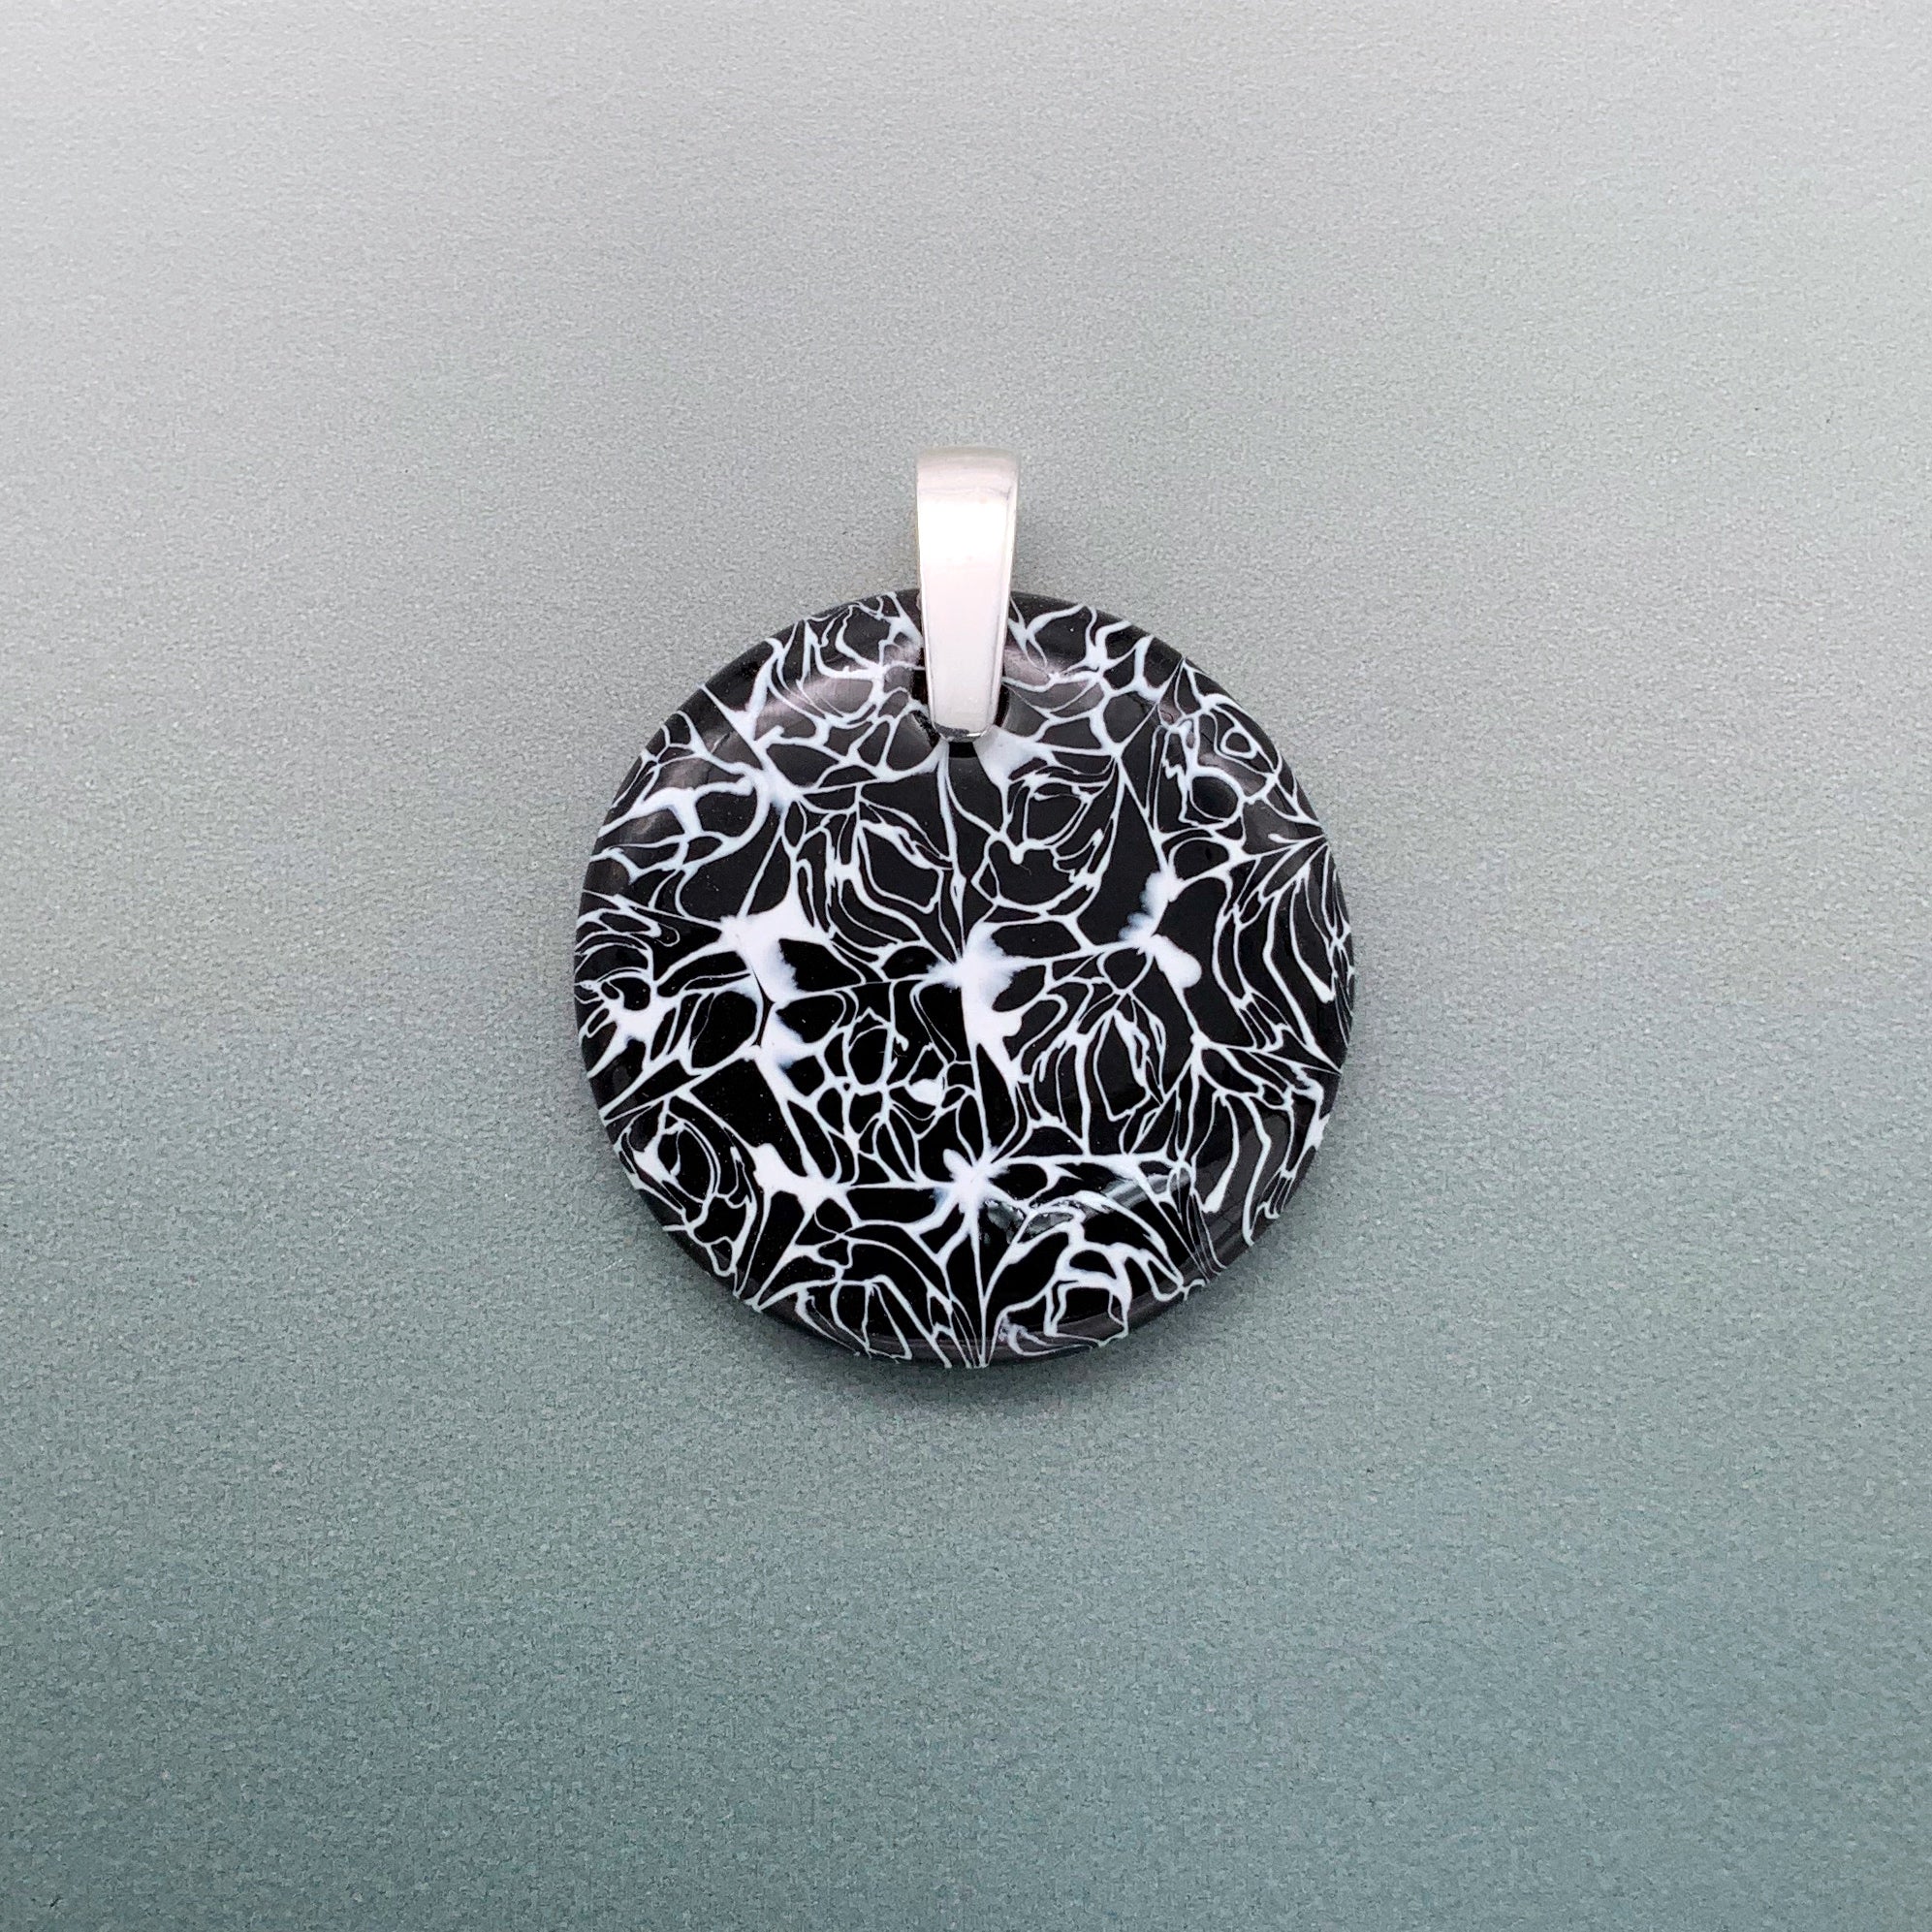 Marmo 35mm round glass pendant - black and white marble